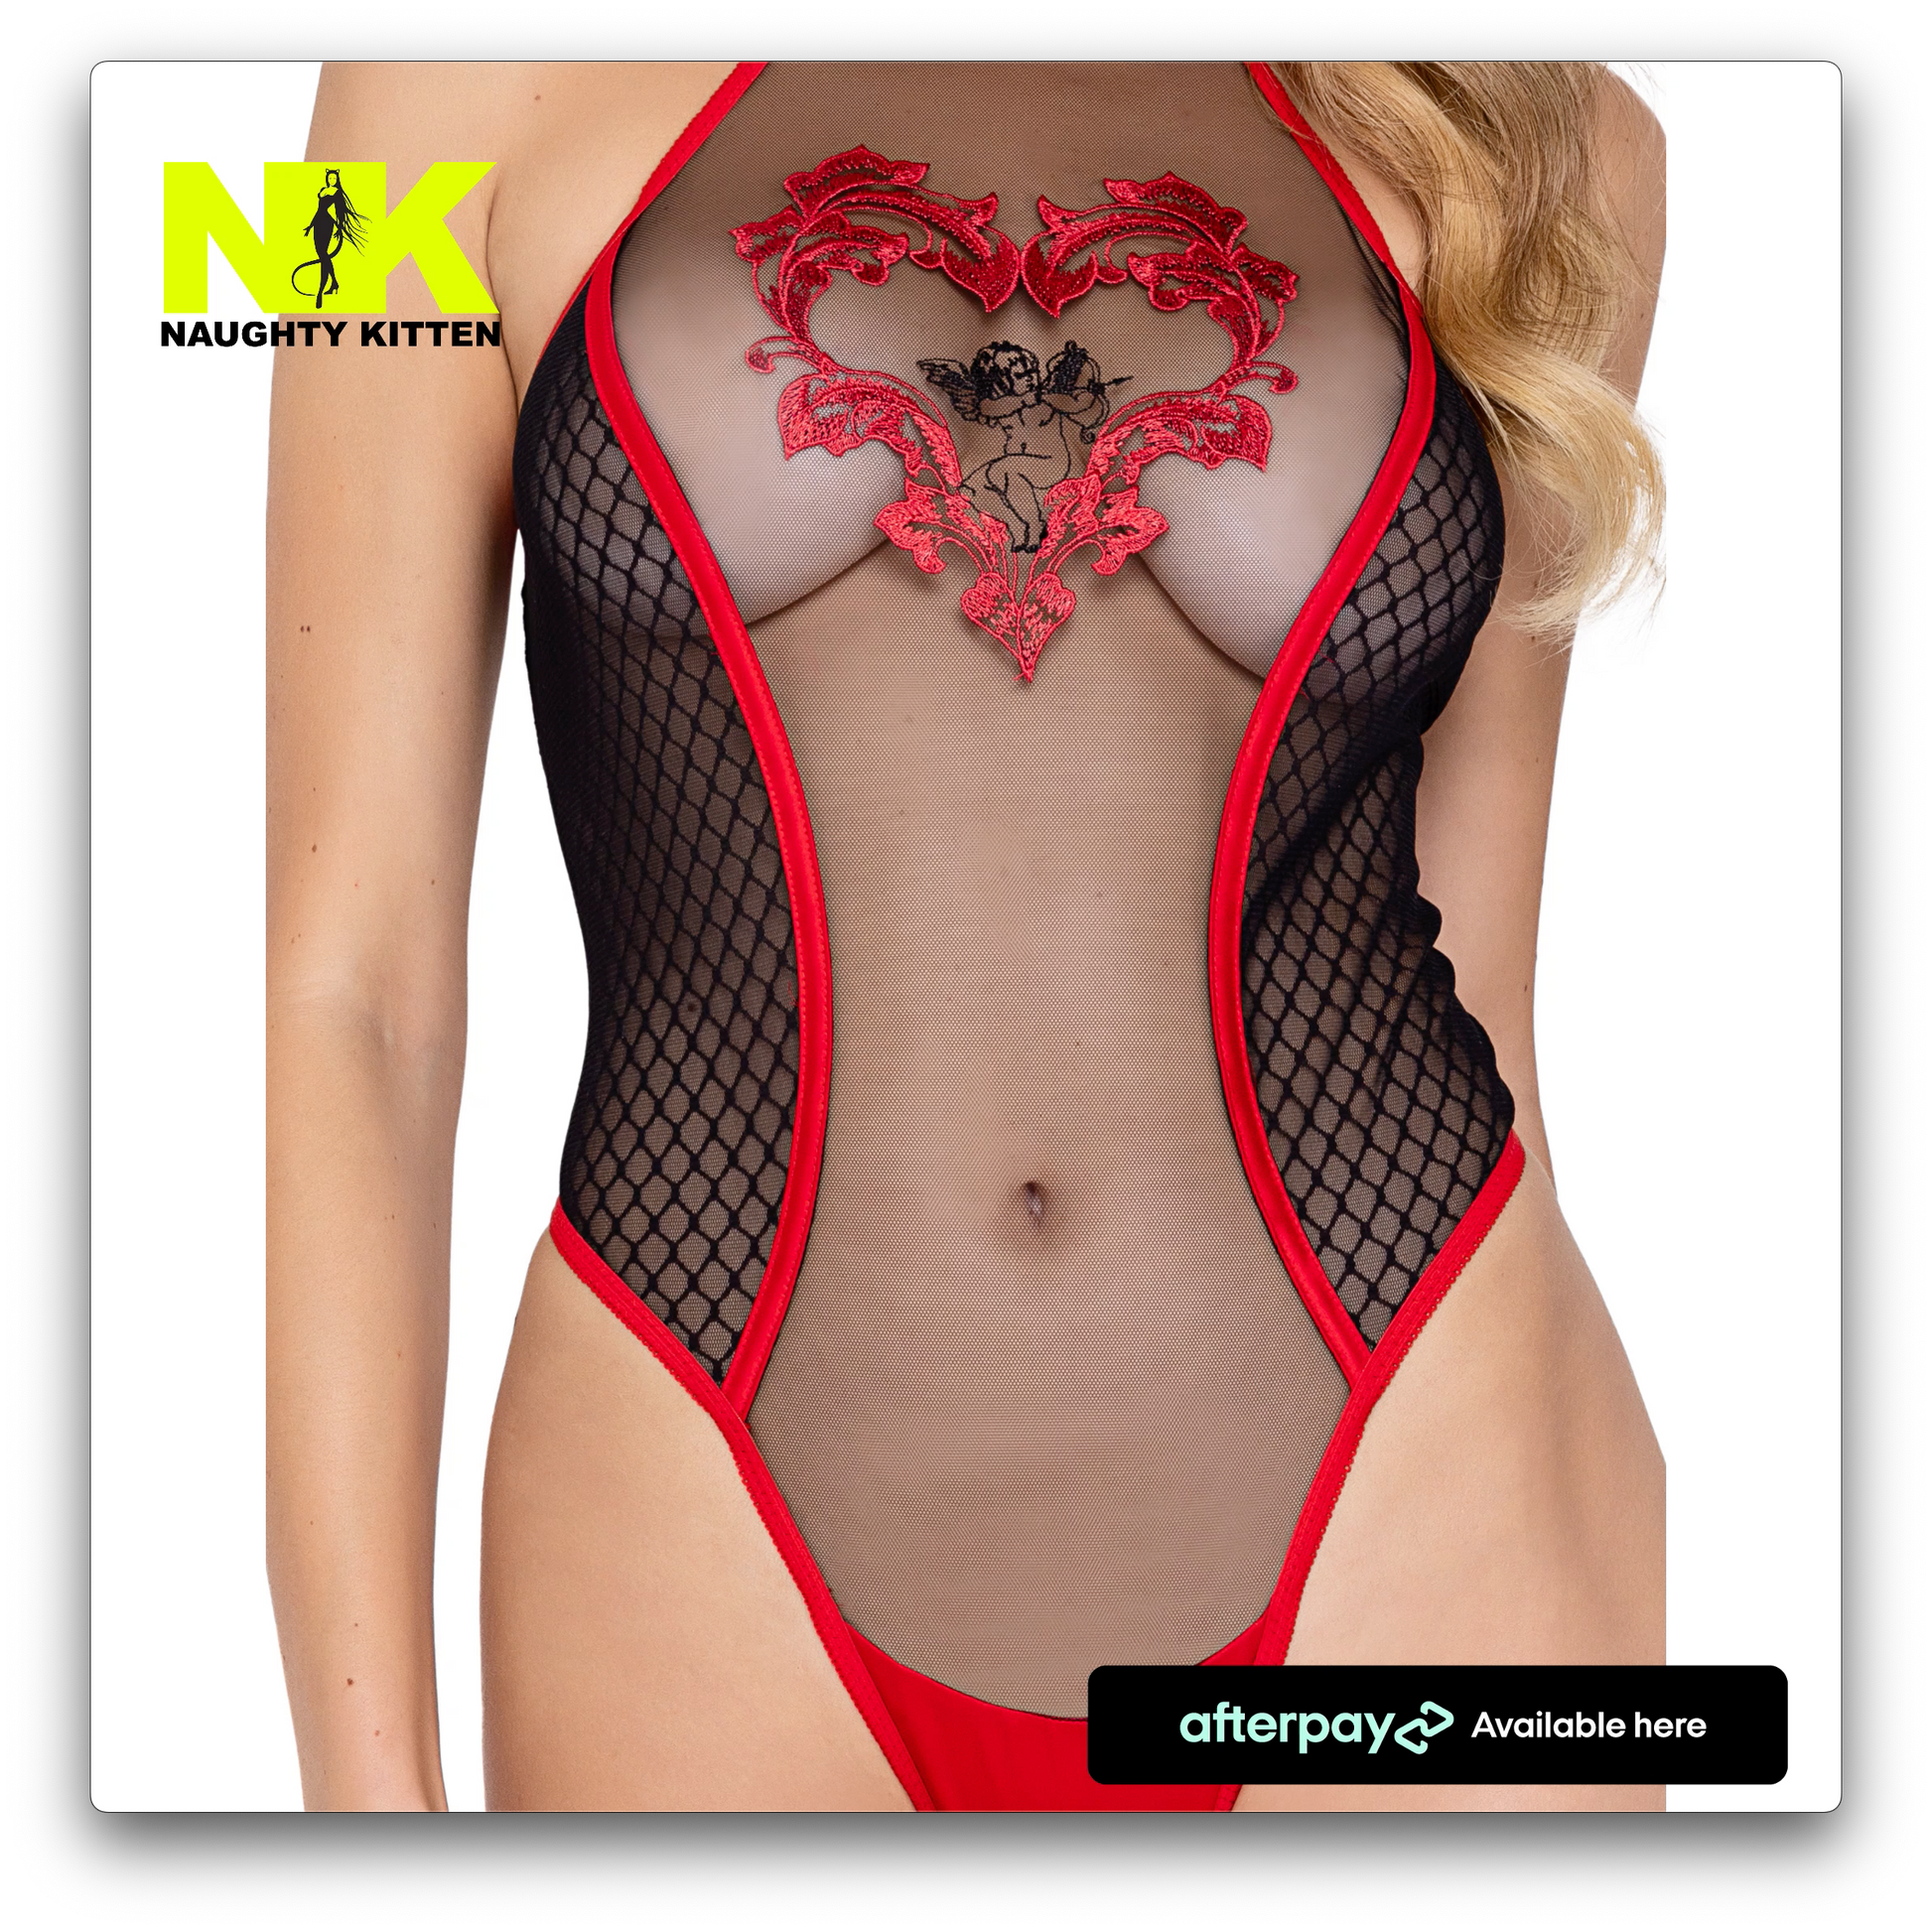 Naughty Kitten Clothing Cupid Heart Teddy Close Up View Lingerie